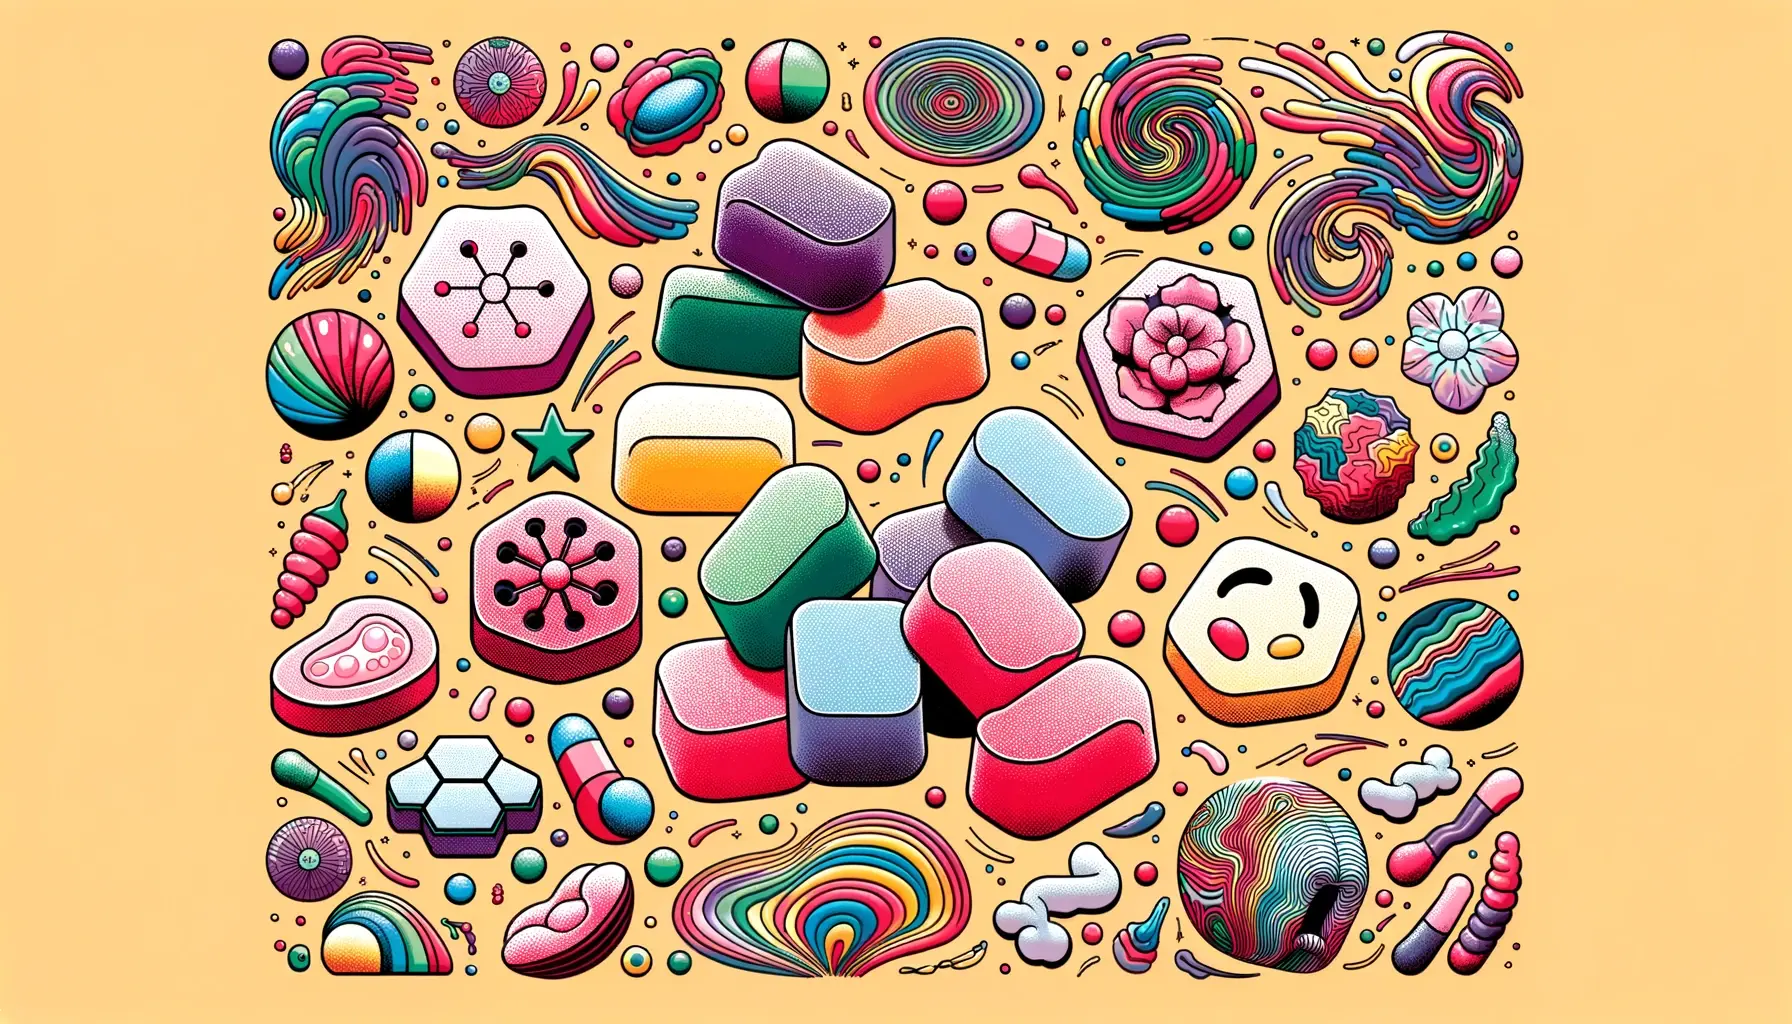 Illustration of muscimol-infused gummies in various flavors and colors. Around them, artistic representations of sensations like relaxation, euphoria, and dizziness are depicted through abstract shapes and patterns.